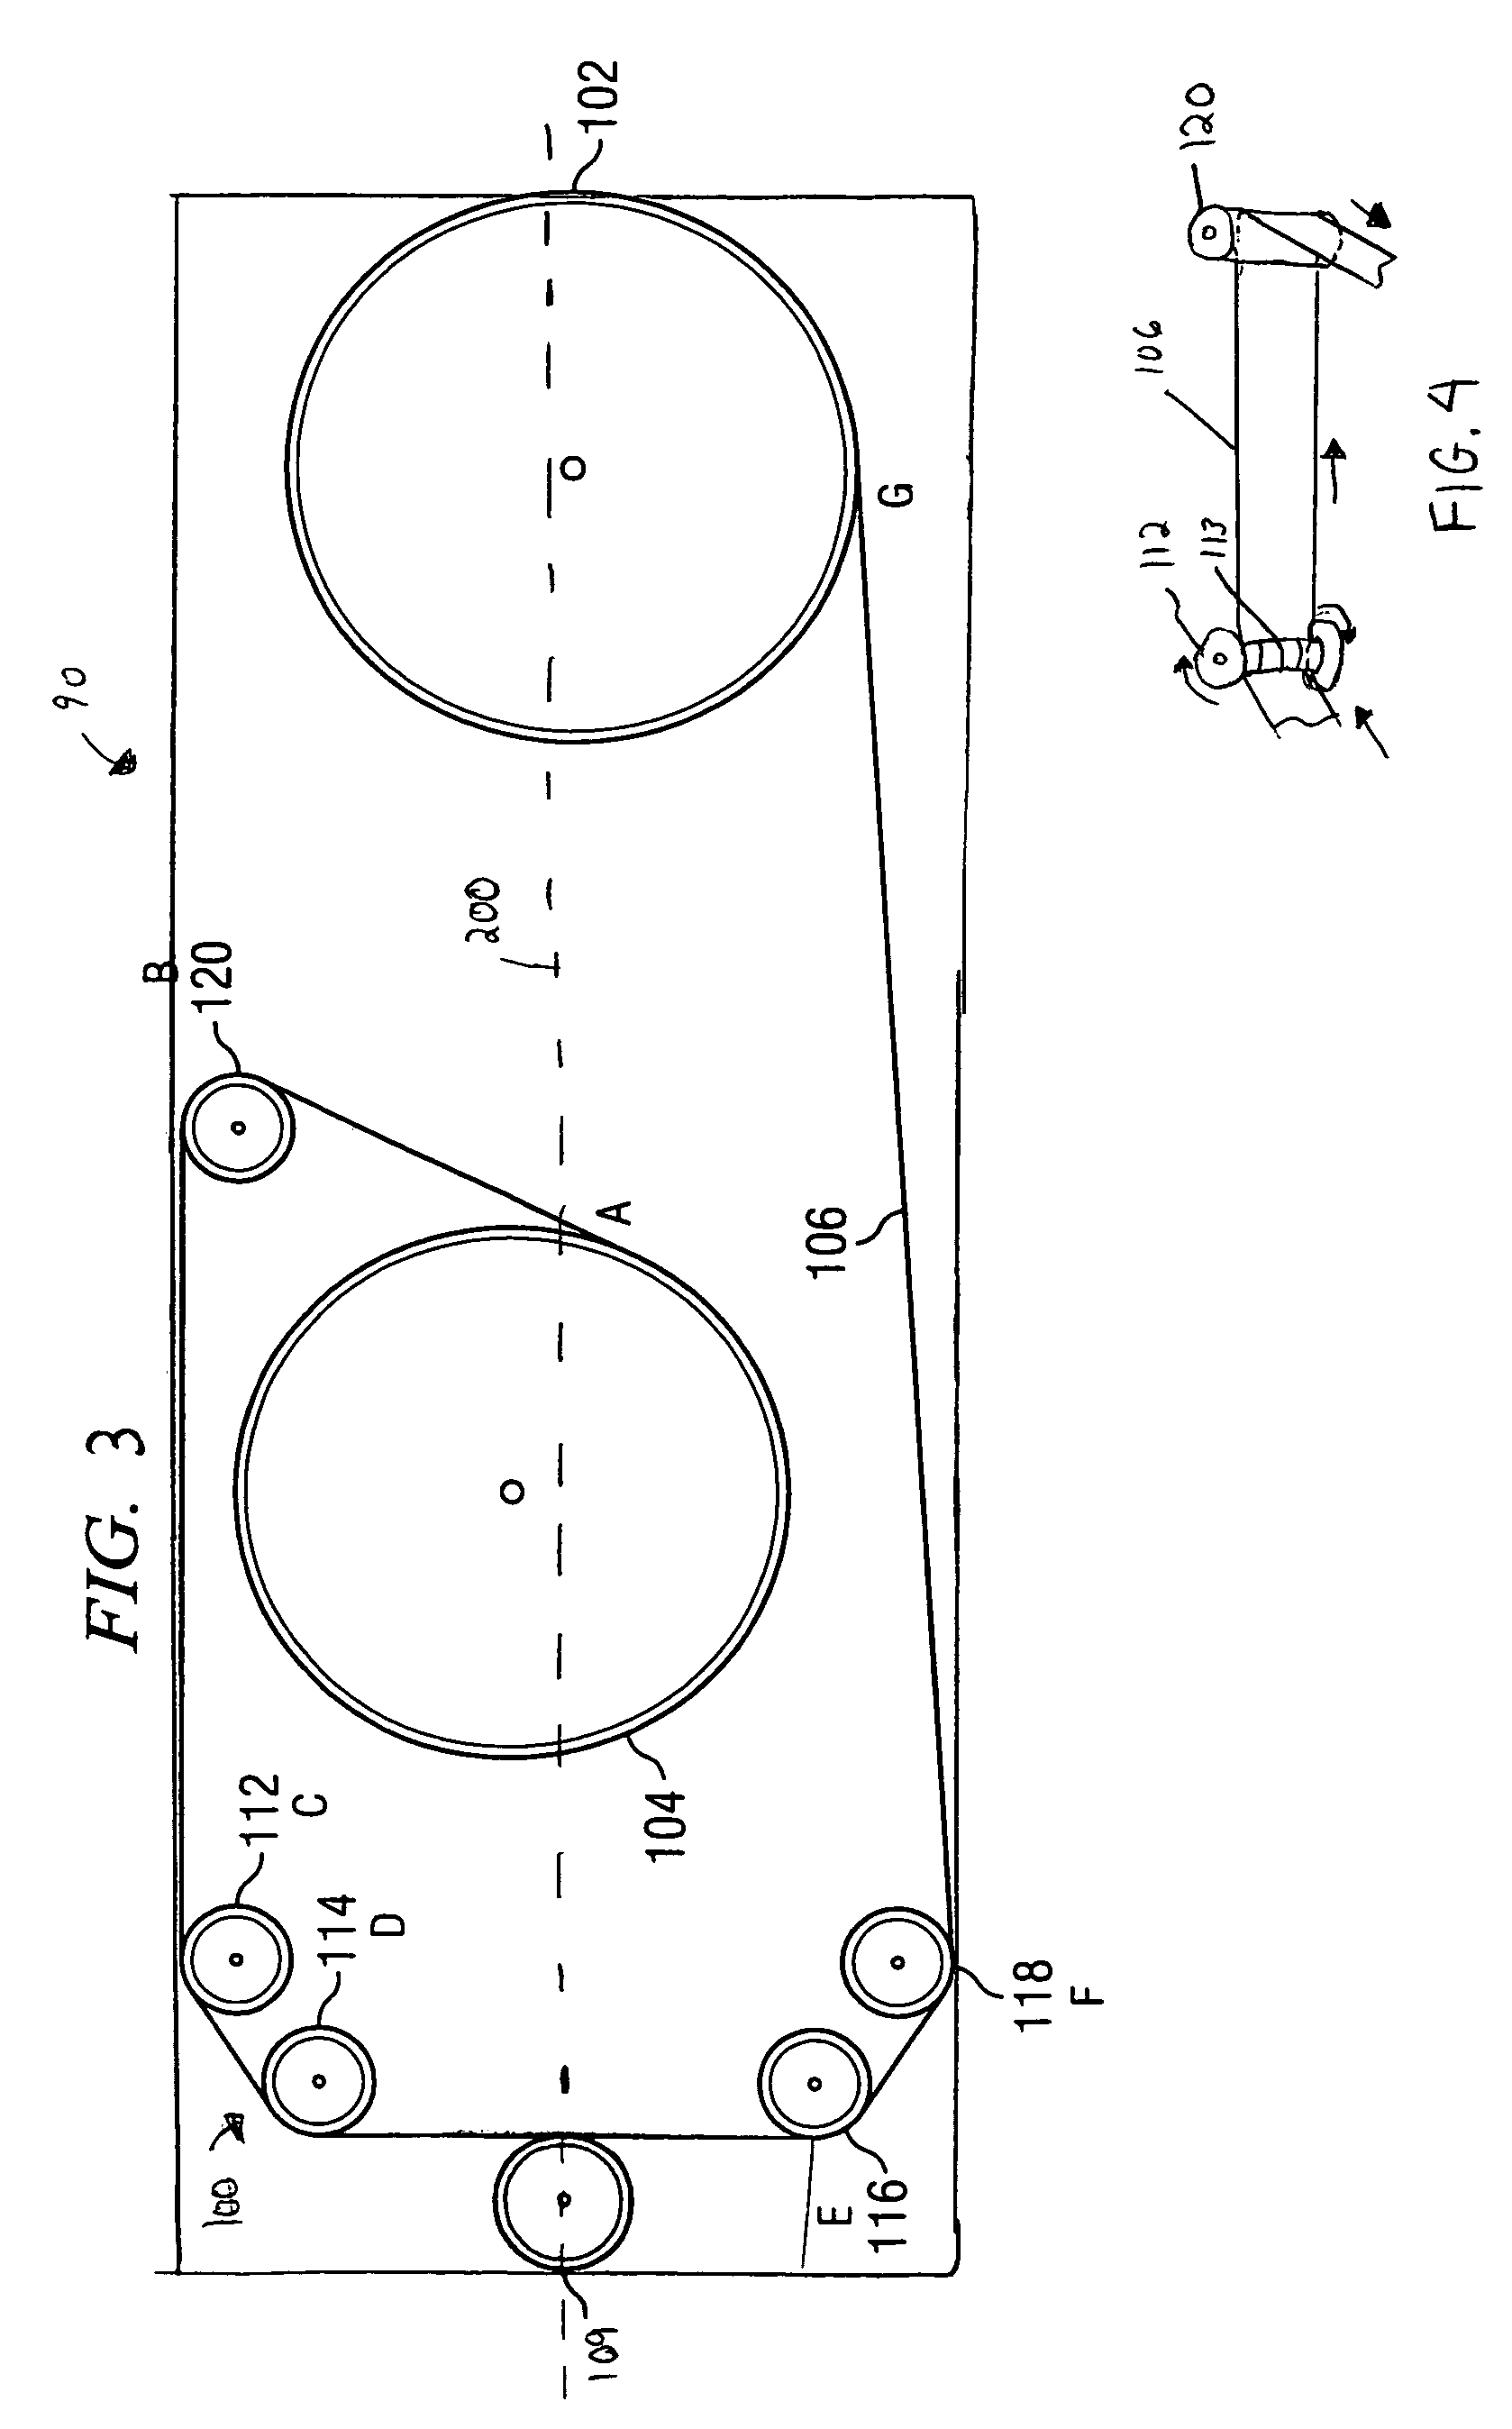 Roller guide tape path